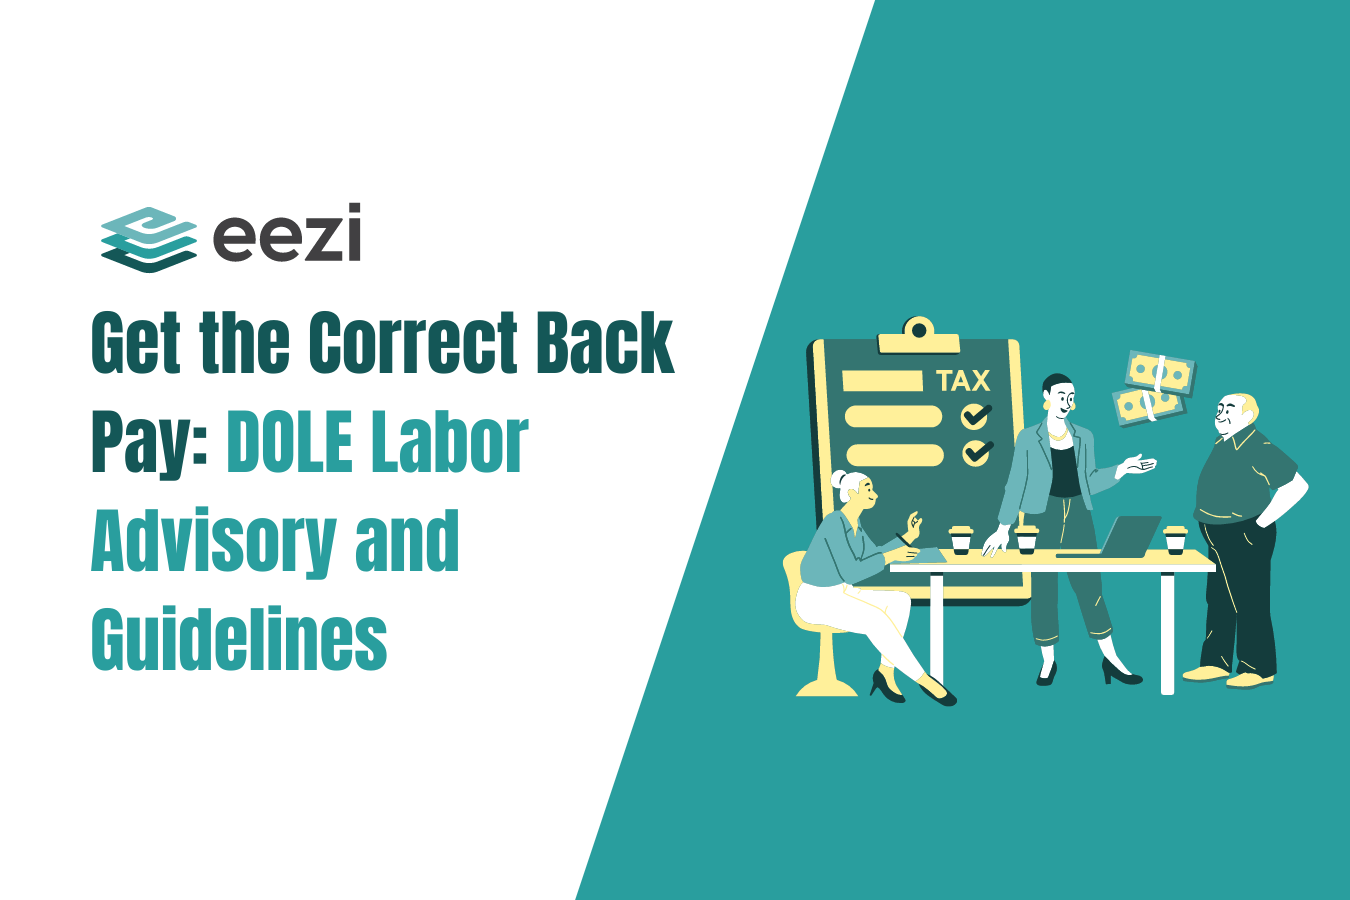 Get the Correct Back Pay - DOLE Labor Advisory and Guidelines